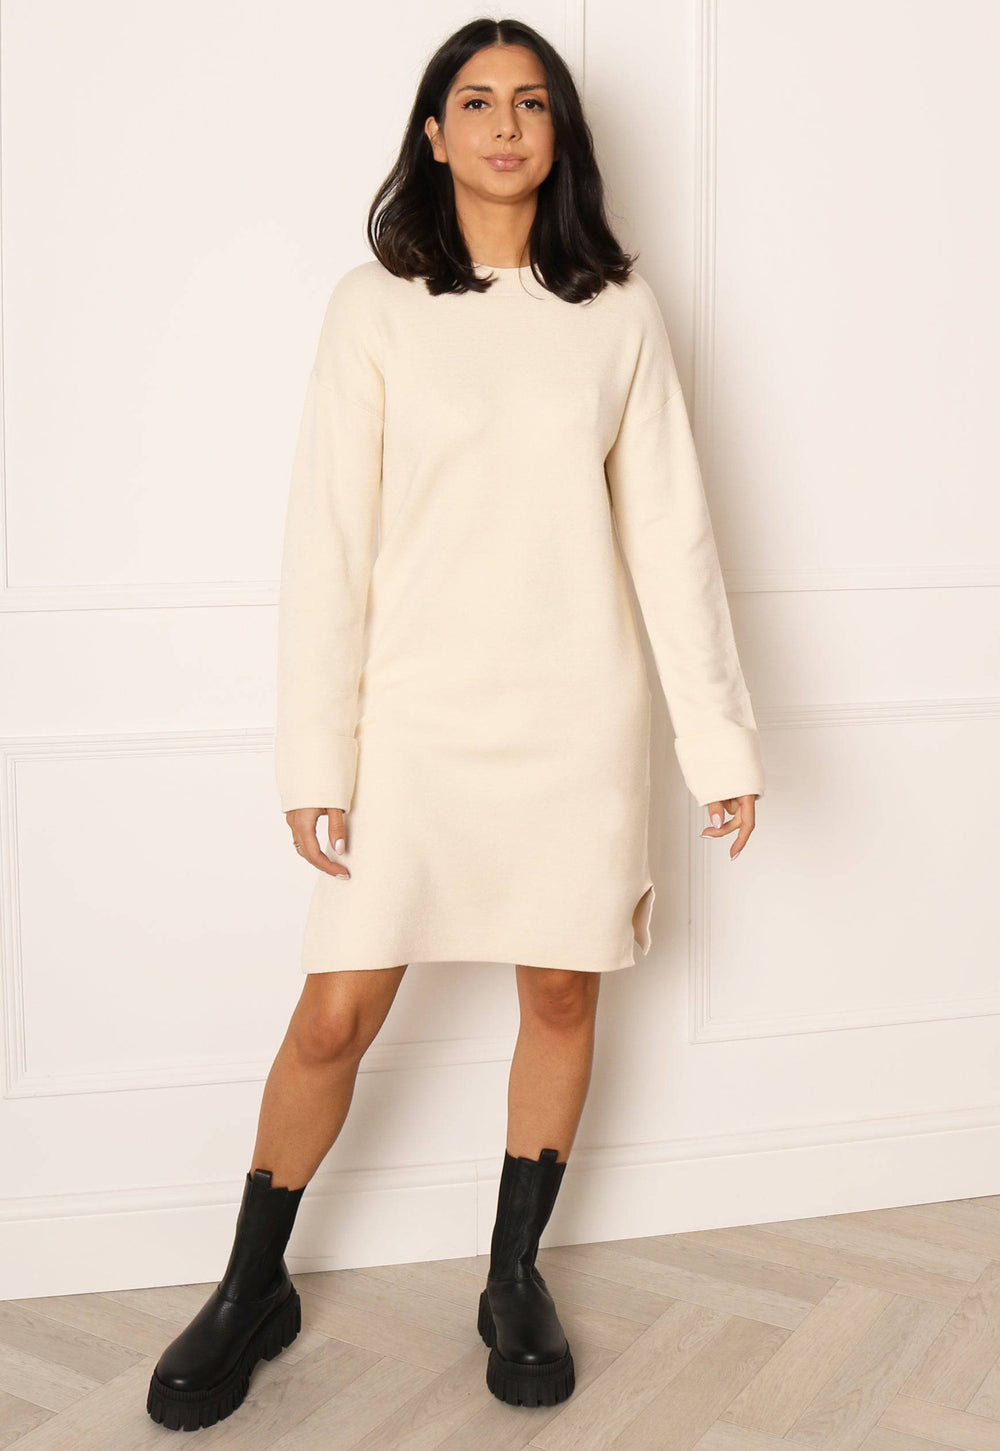 VERO MODA Gold Soft Knit Jumper Dress with side Splits in Soft Cream - One Nation Clothing